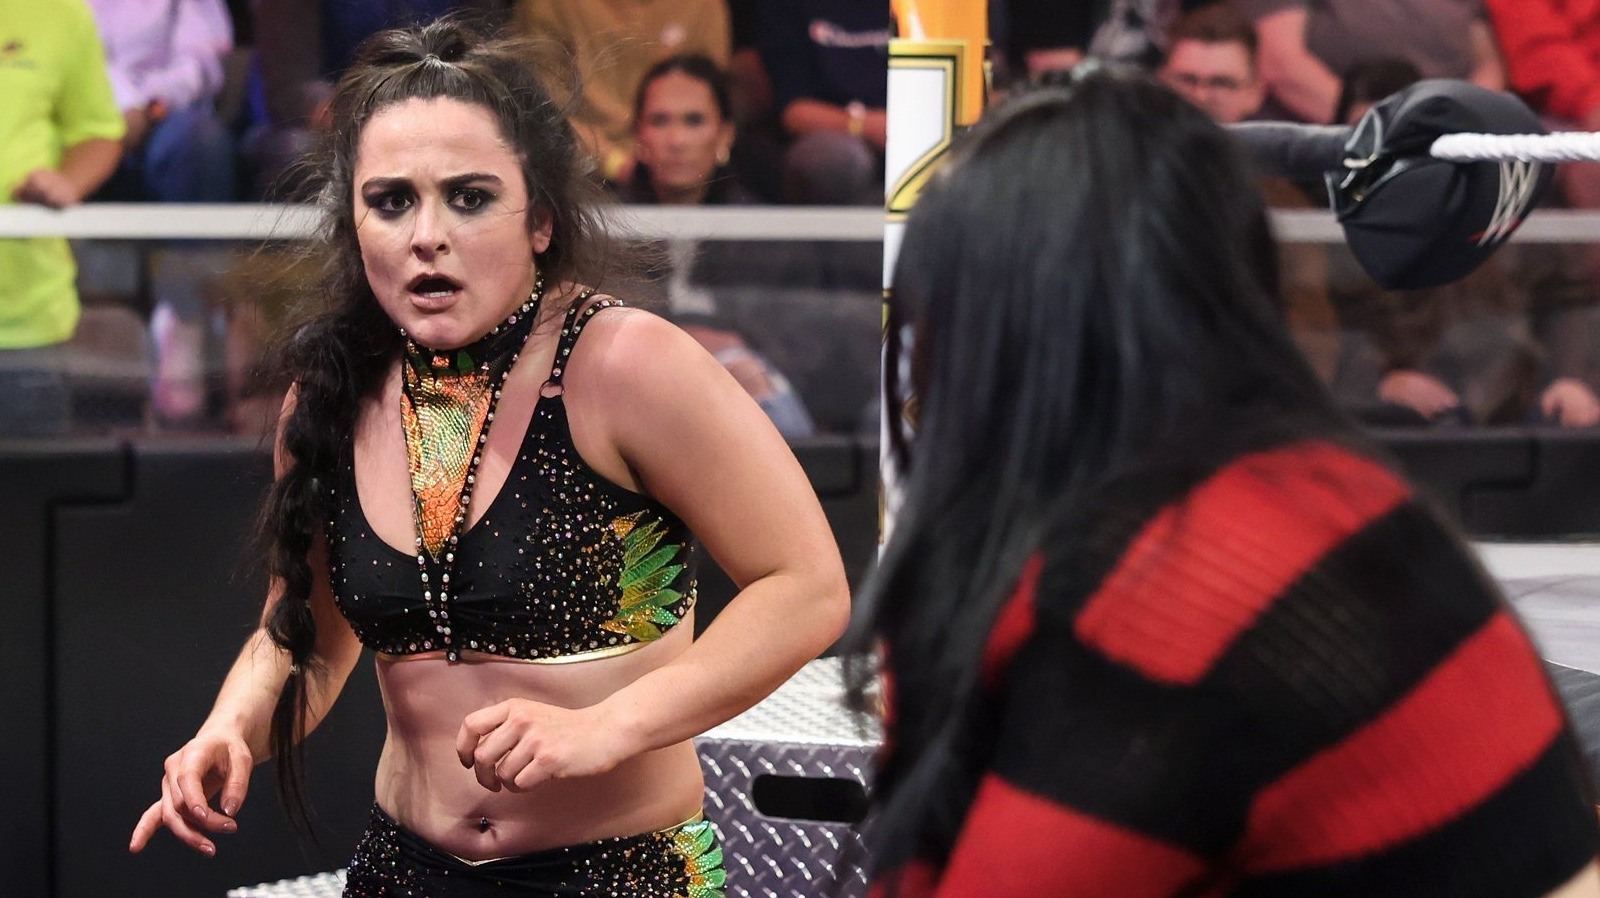 WWE NXT Women's Champion Lyra Valkyria Discusses Her Training For